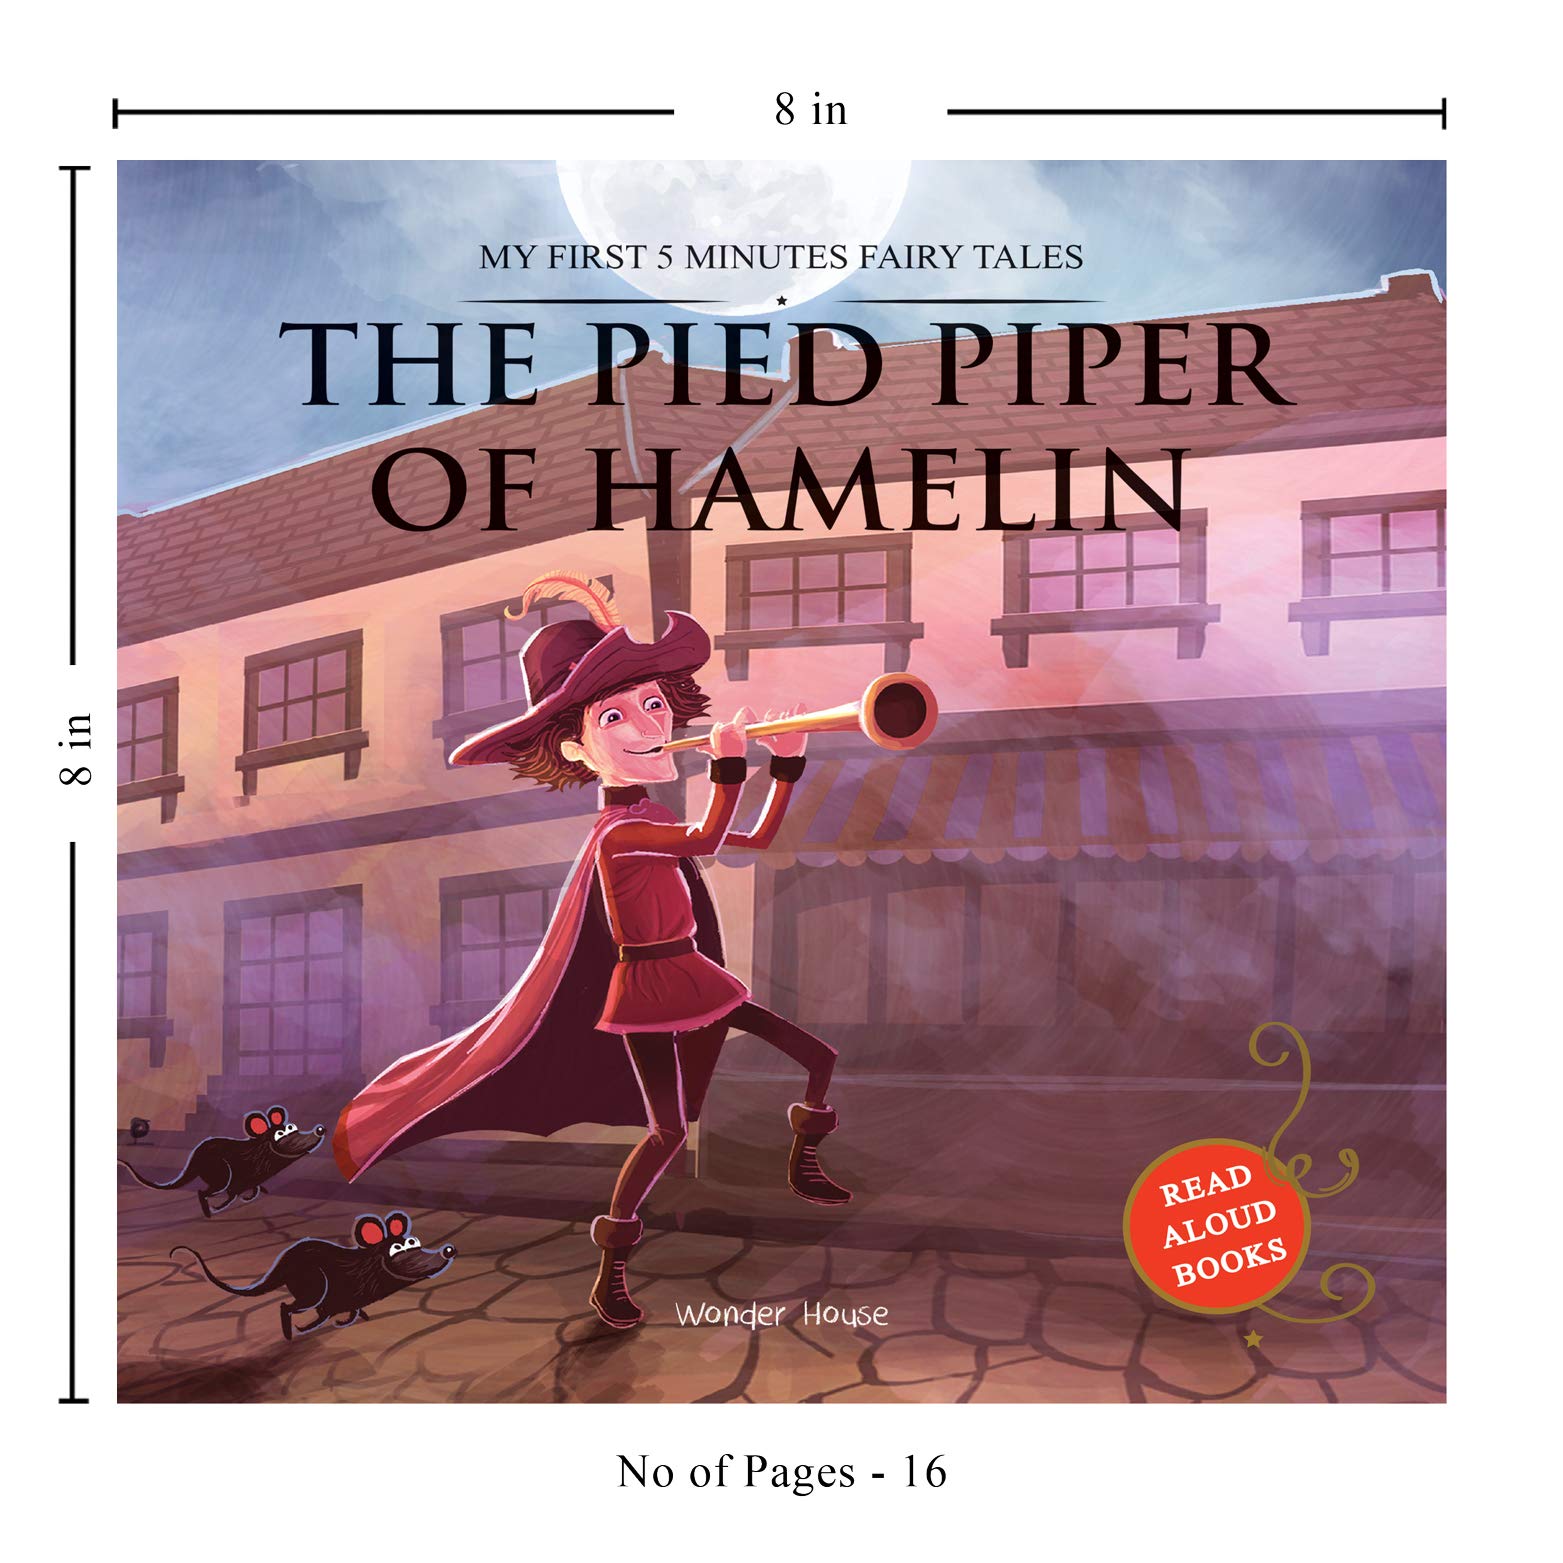 My First 5 Minutes Fairy tales Pied Piper of Hamelin (Read Aloud Books)